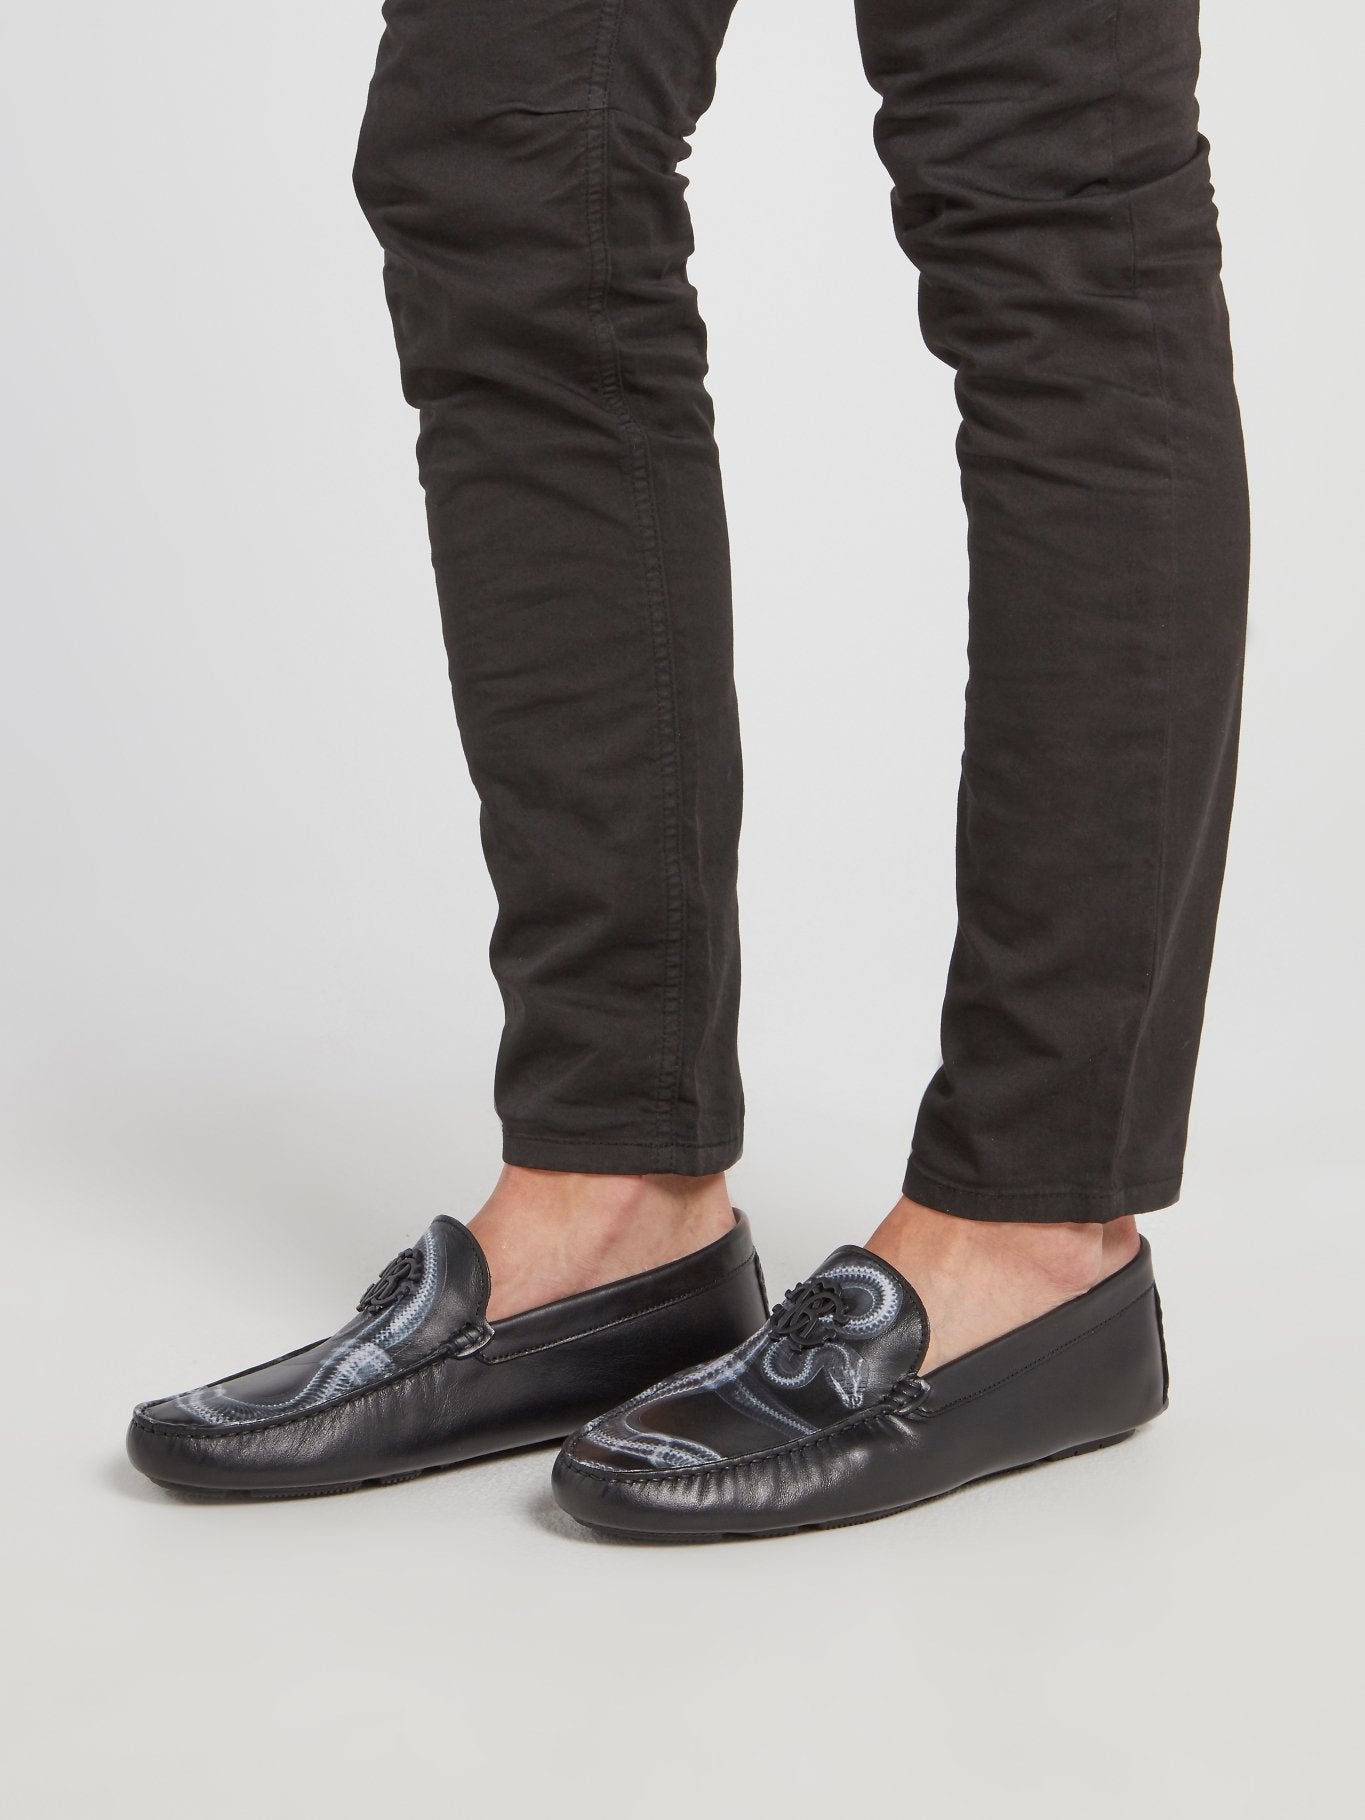 Black Snake Print Leather Loafers